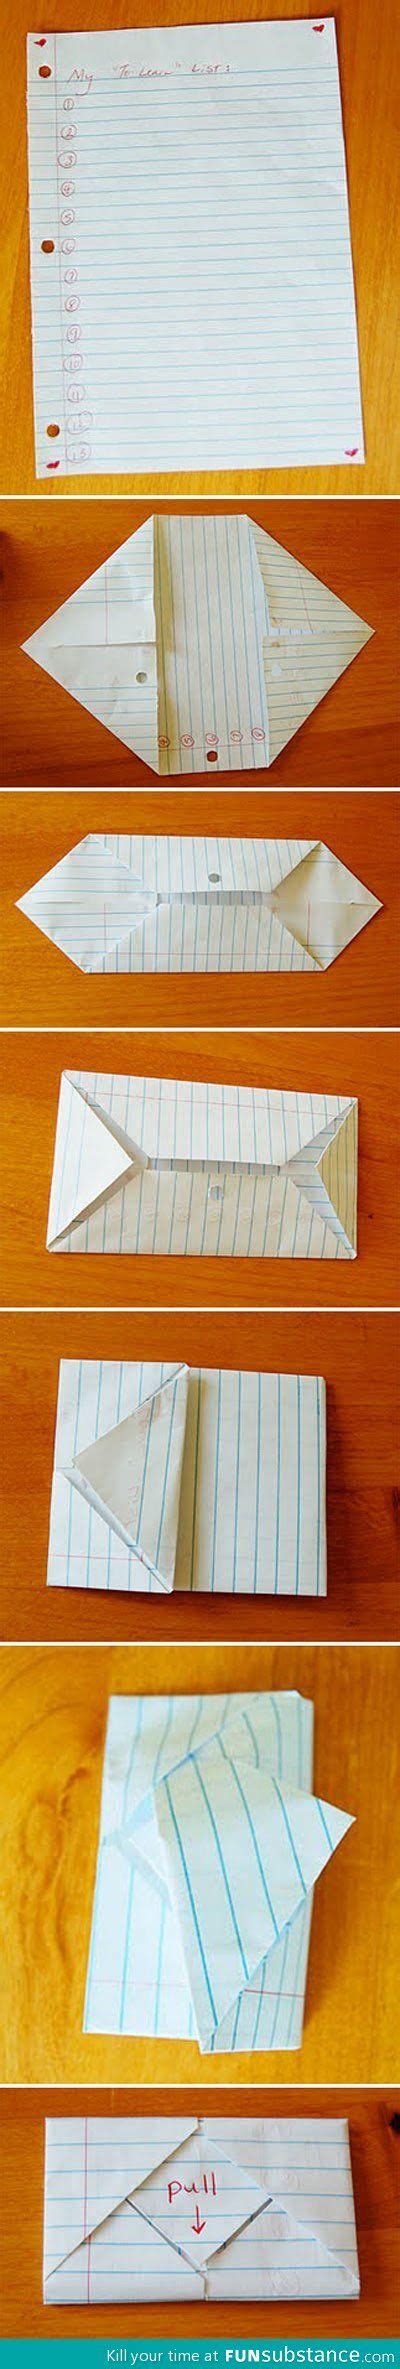 How To Fold A Note Envelope I Remember Doing This All The Time Origami